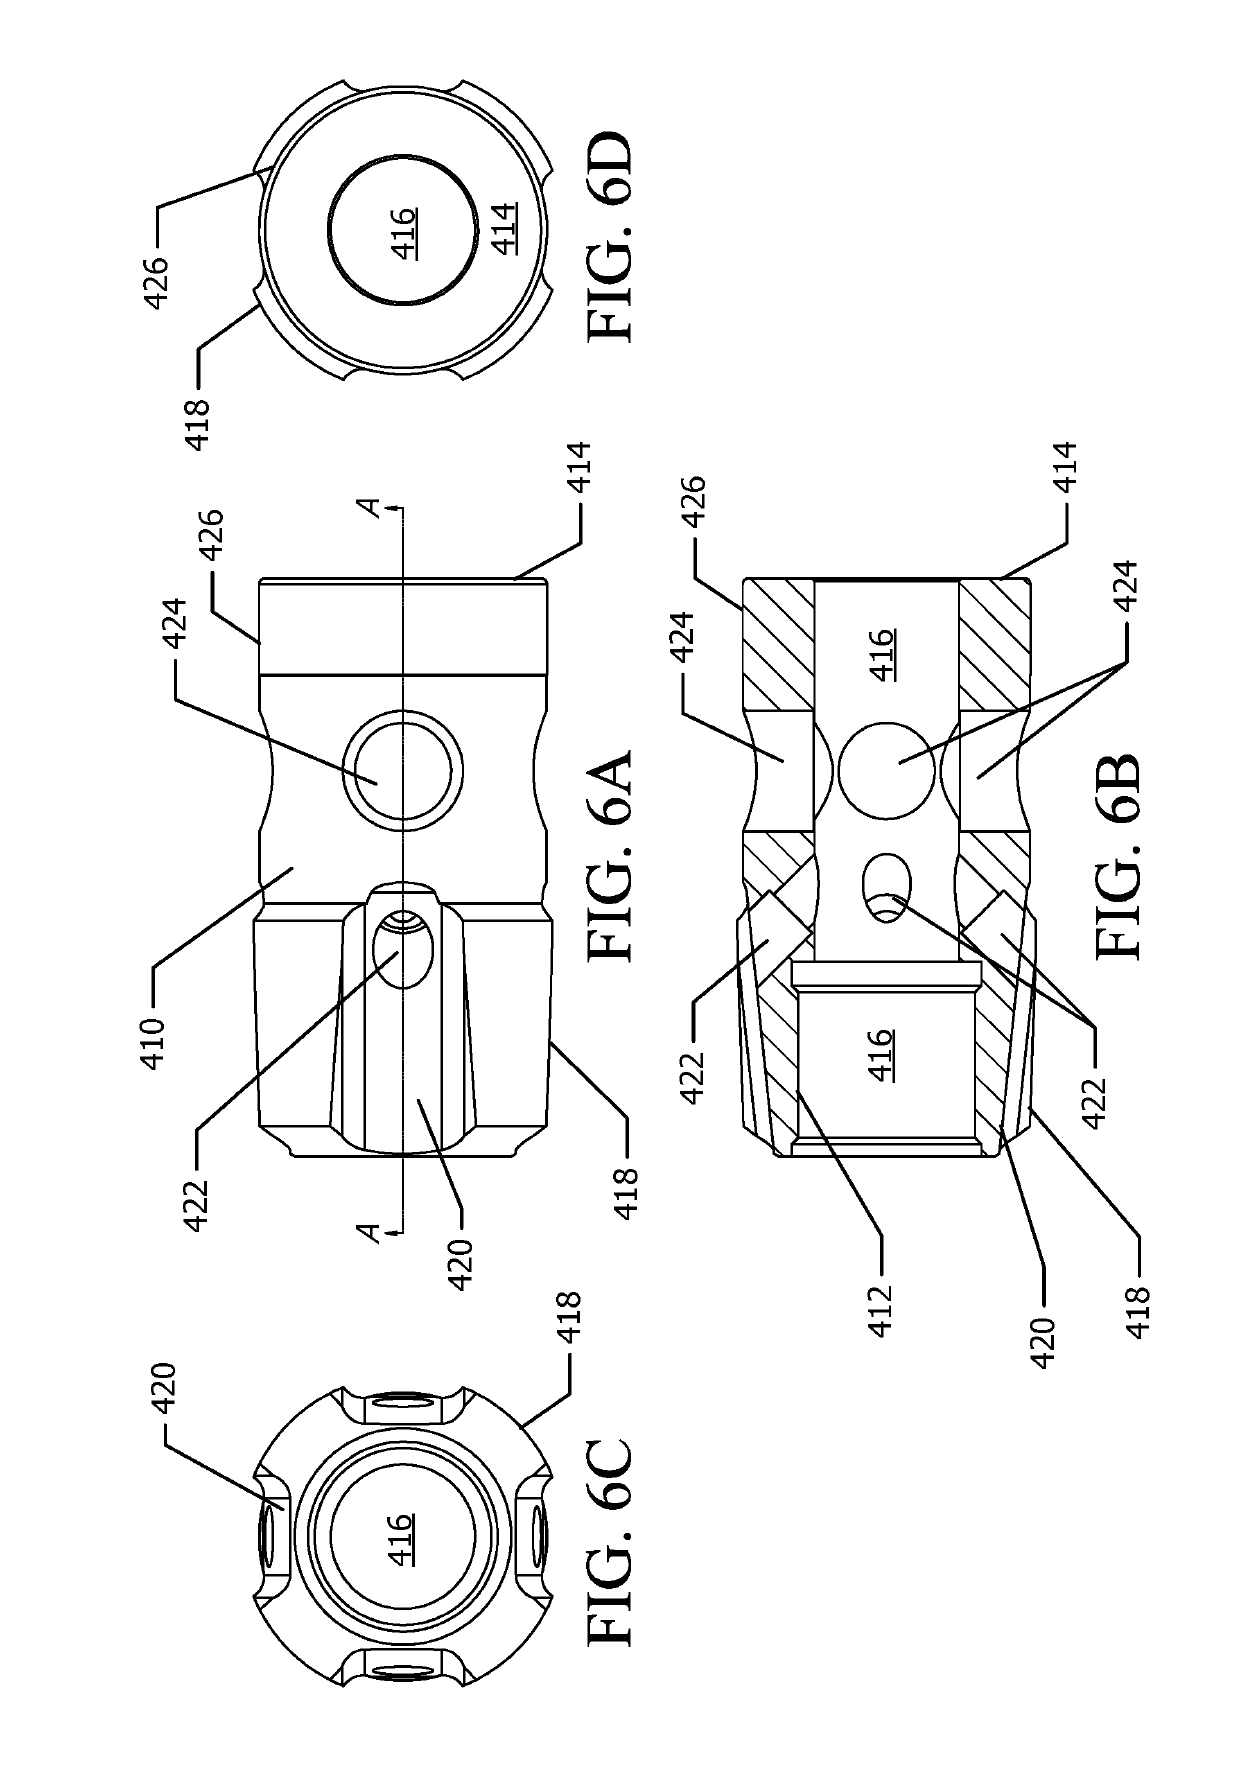 Flow-through pulsing assembly for use in downhole operations